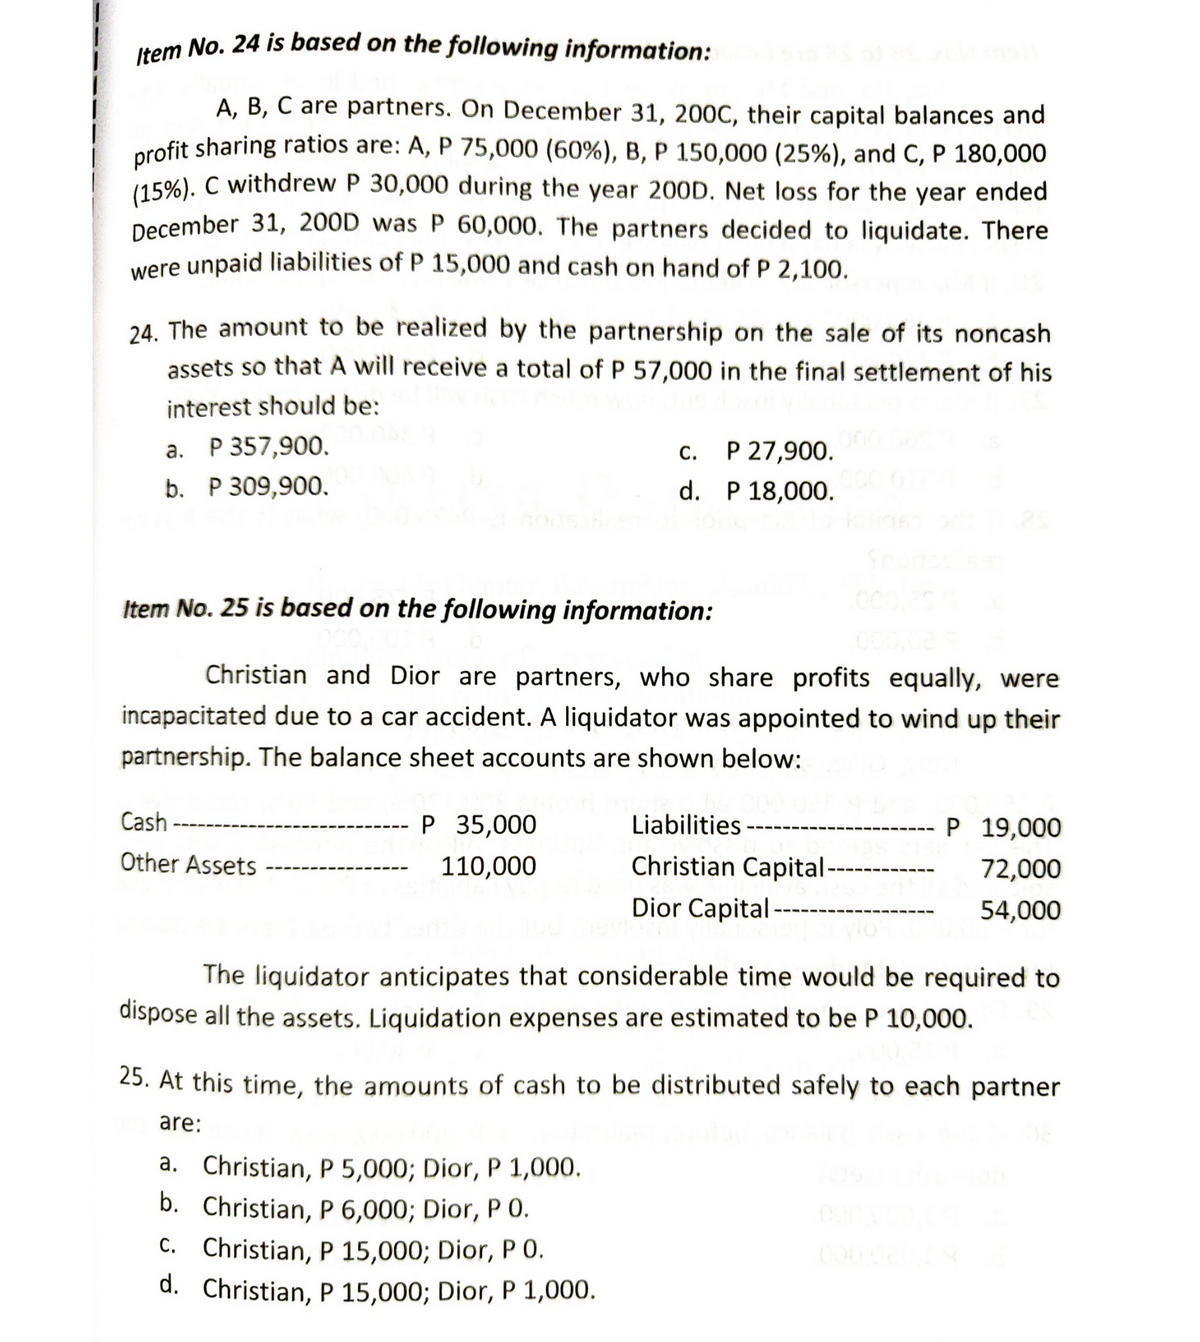 Item No. 24 is based on the following information:
A, B, C are partners. On December 31, 200C, their capital balances and
profit sharing ratios are: A, P 75,000 (60%) , B, P 150,000 (25%), and C, P 180,000
(15%). C withdrew P 30,000 during the year 200D. Net loss for the year ended
December 31, 200D was P 60,000. The partners decided to liquidate. There
were unpaid liabilities of P 15,000 and cash on hand of P 2,100.
24. The amount to be realized by the partnership on the sale of its noncash
assets so that A will receive a total of P 57,000 in the final settlement of his
interest should be:
a. P 357,900.
C. P 27,900.
b. P 309,900.
d.
P 18,000.
Item No. 25 is based on the following information:
Christian and Dior are partners, who share profits equally, were
incapacitated due to a car accident. A liquidator was appointed to wind up their
partnership. The balance sheet accounts are shown below:
Cash
P 35,000
Liabilities
P 19,000
Other Assets
110,000
72,000
Christian Capital ----
Dior Capital
54,000
The liquidator anticipates that considerable time would be required to
dispose all the assets. Liquidation expenses are estimated to be P 10,000.
25. At this time, the amounts of cash to be distributed safely to each partner
are:
a. Christian, P 5,000; Dior, P 1,000.
b. Christian, P 6,000; Dior, P 0.
C. Christian, P 15,000; Dior, PO.
d. Christian, P 15,000; Dior, P 1,000.